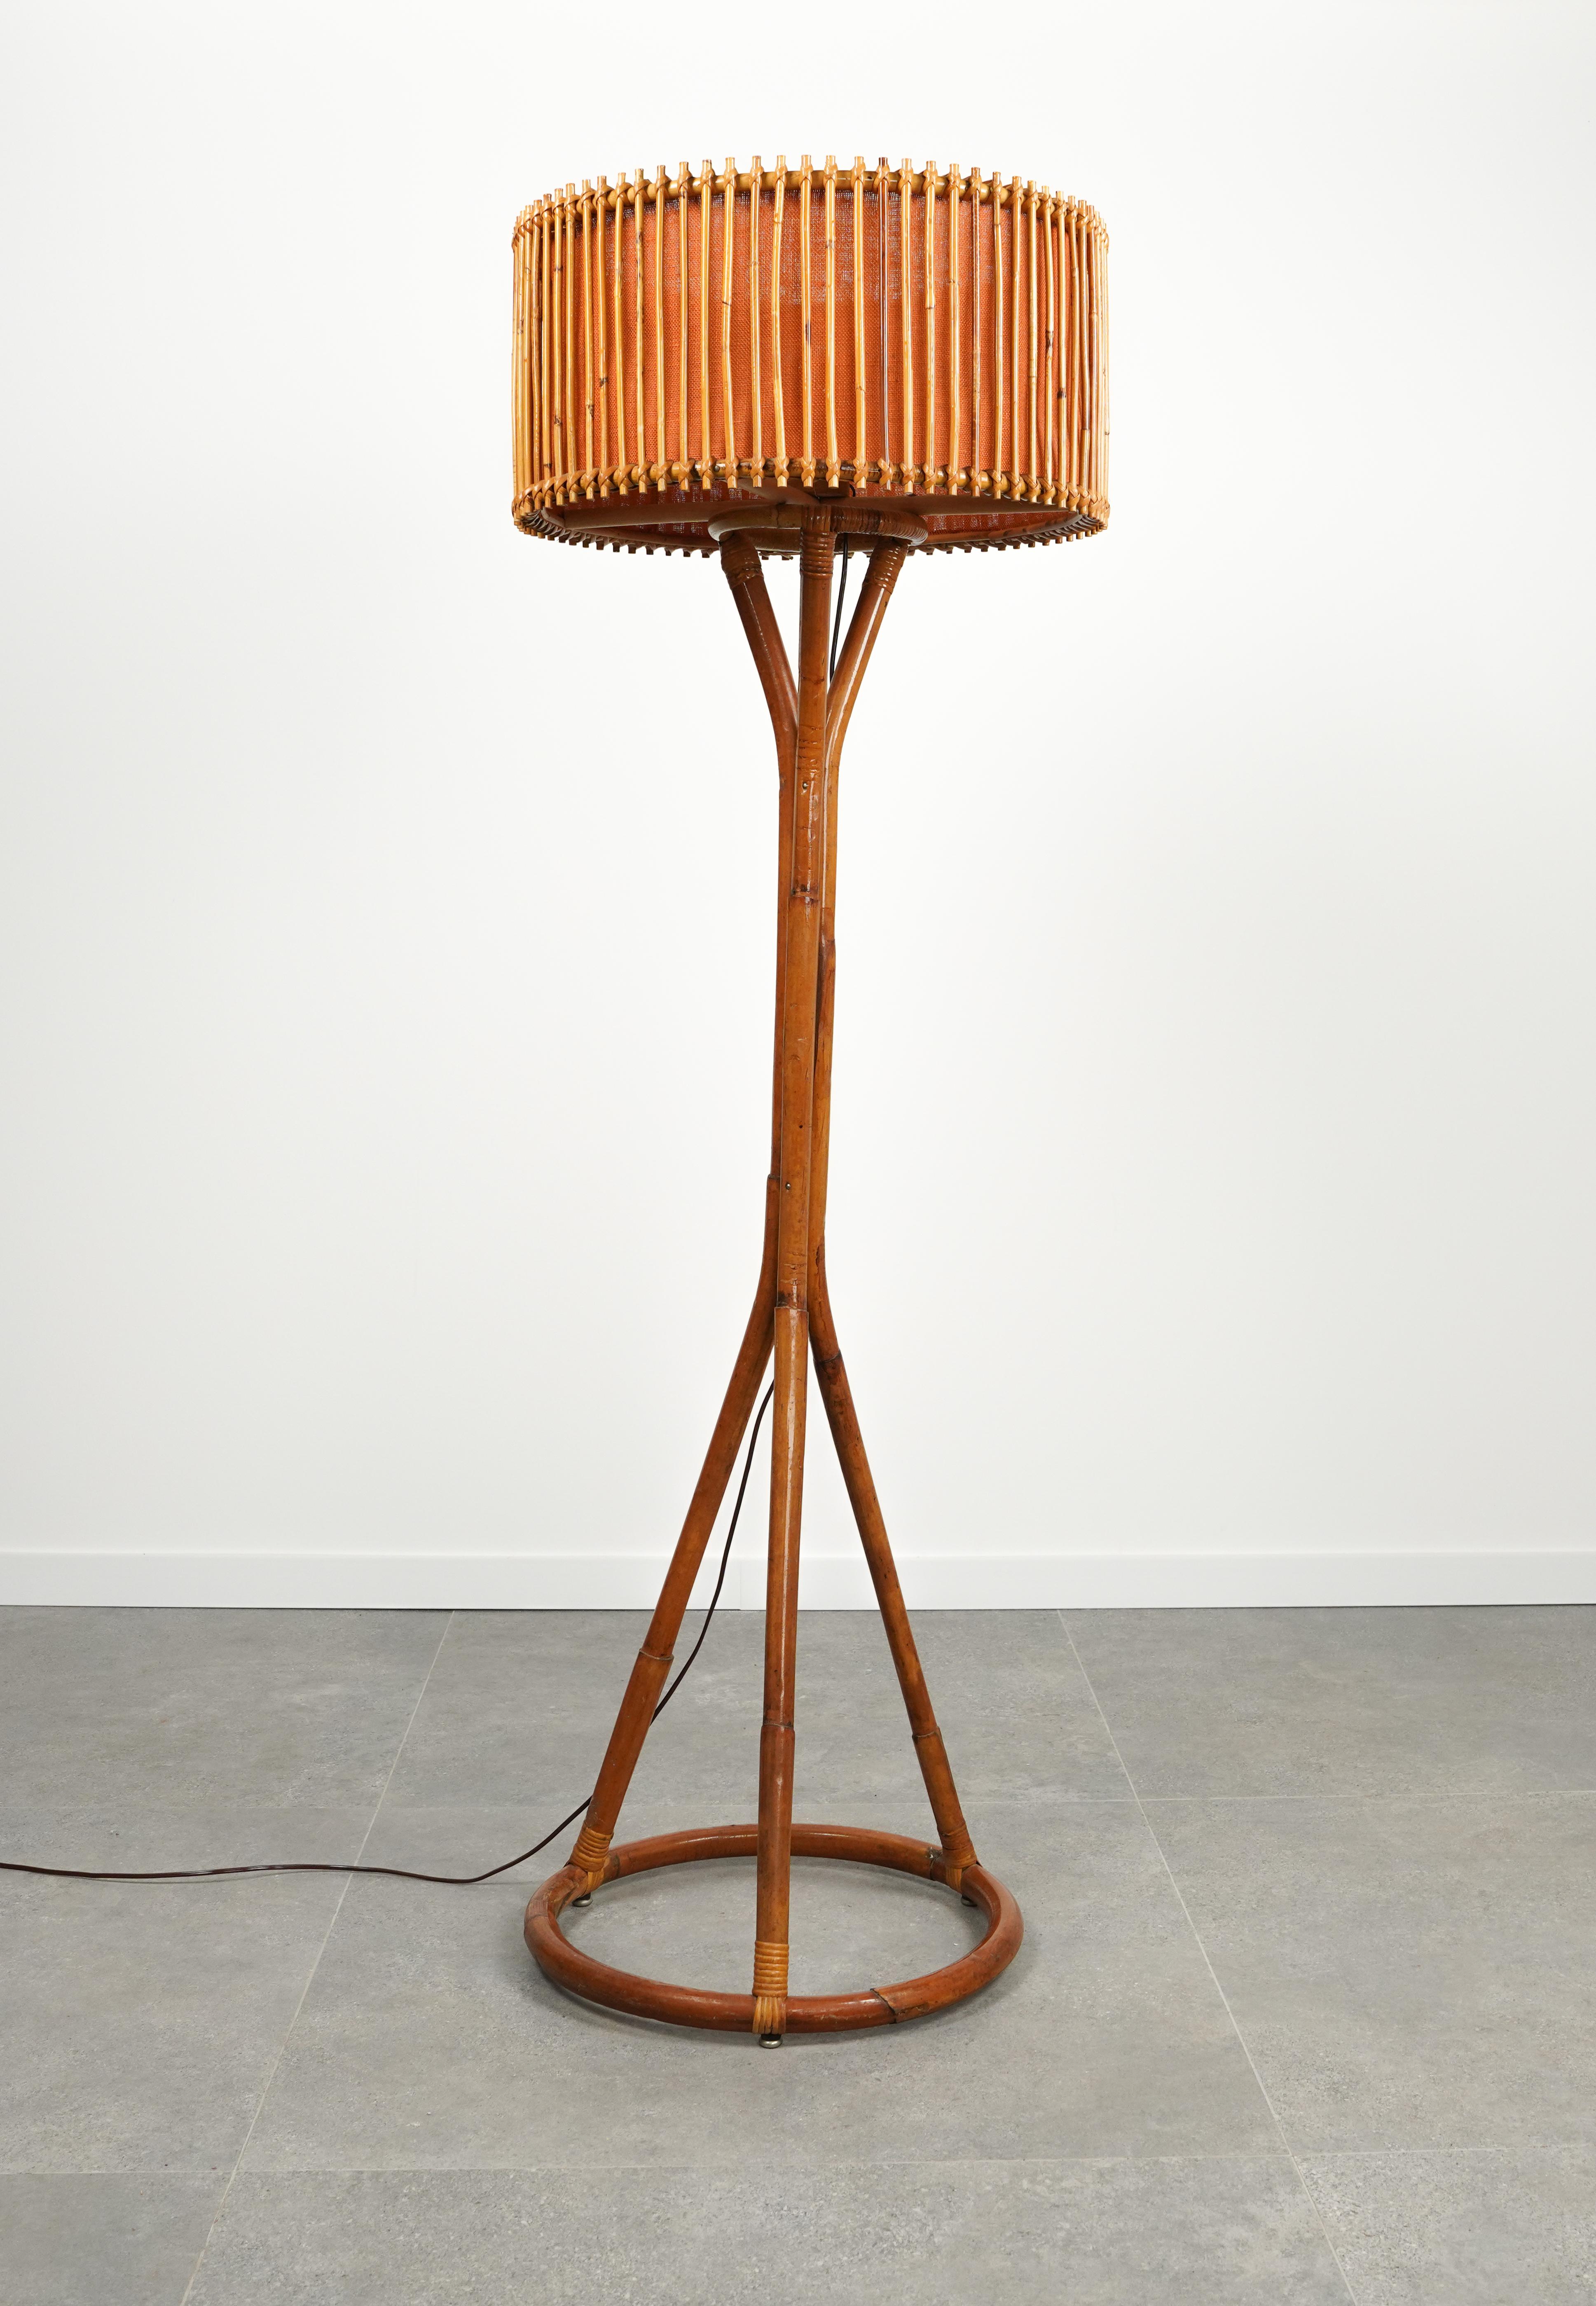 Italian Midcentury Bamboo and Rattan Floor Lamp Franco Albini Style, Italy 1960s For Sale